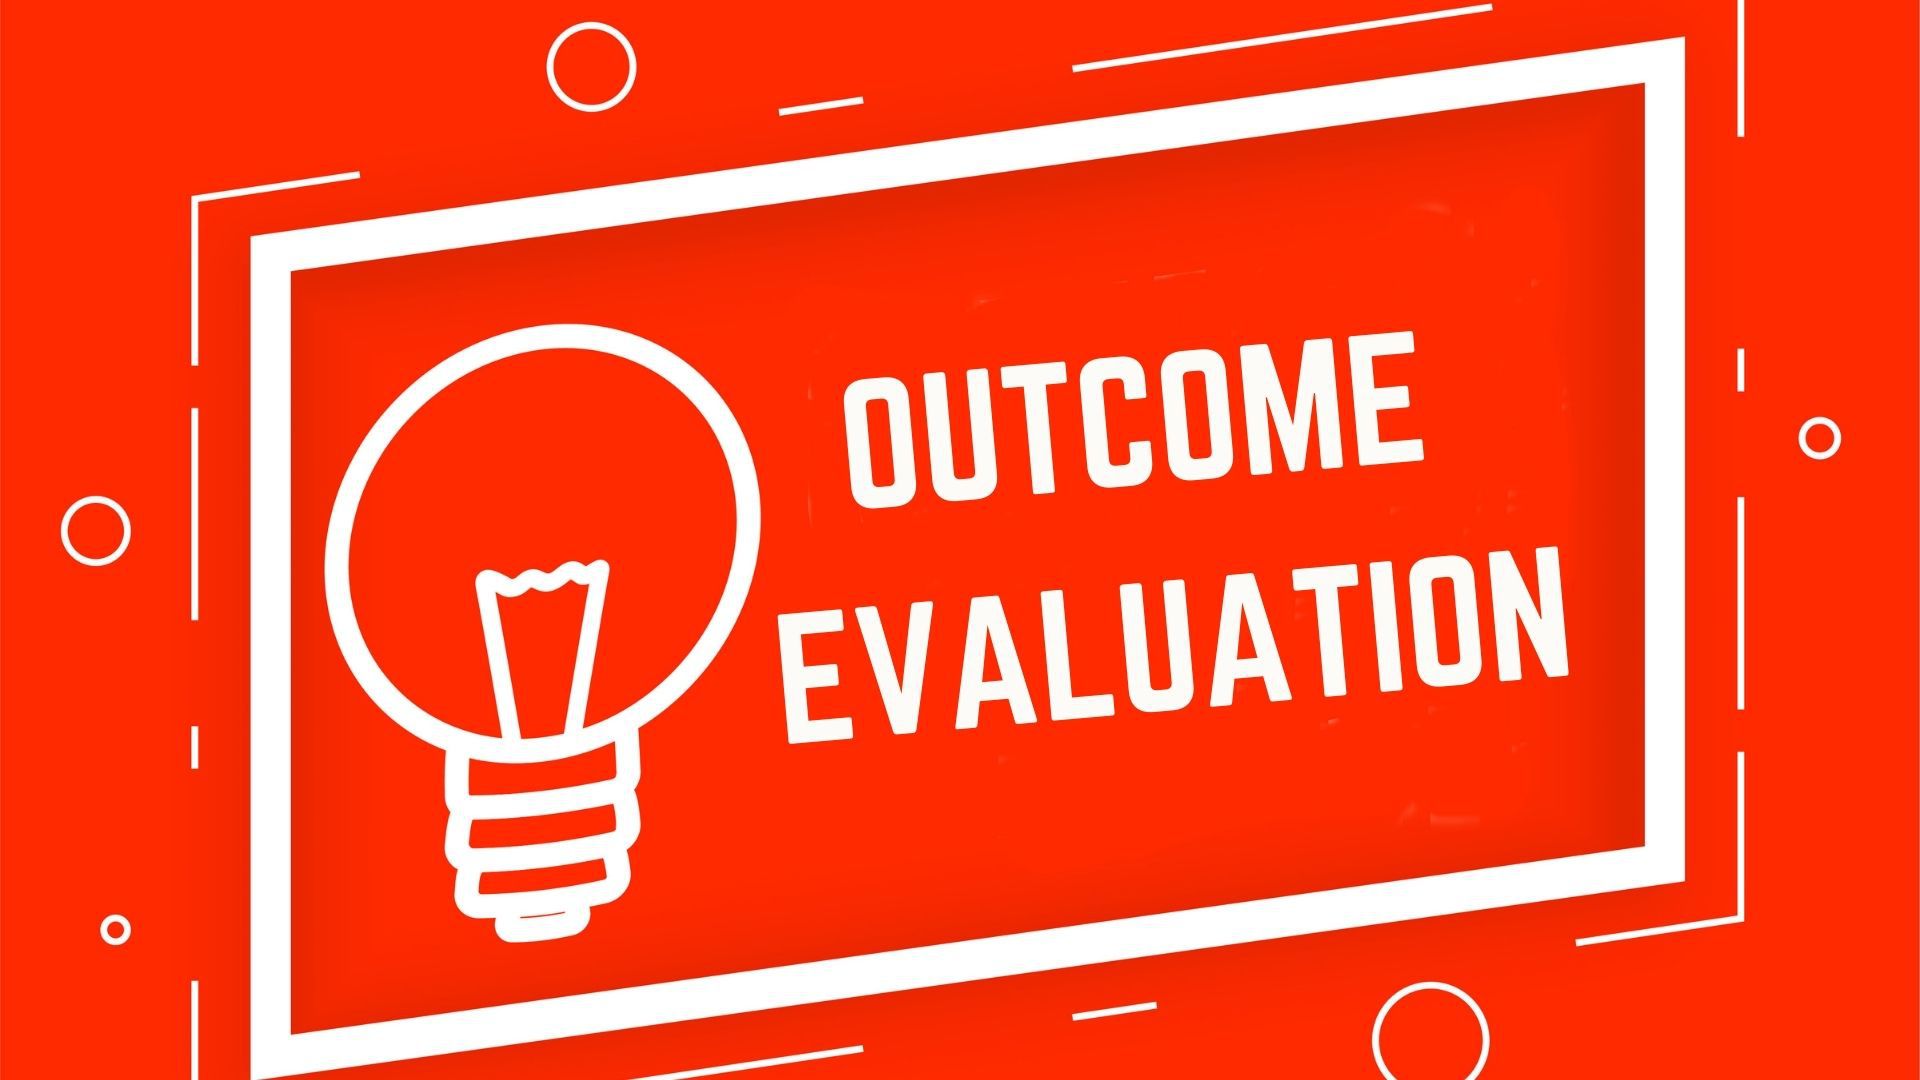 negotiate the best outcome evaluation